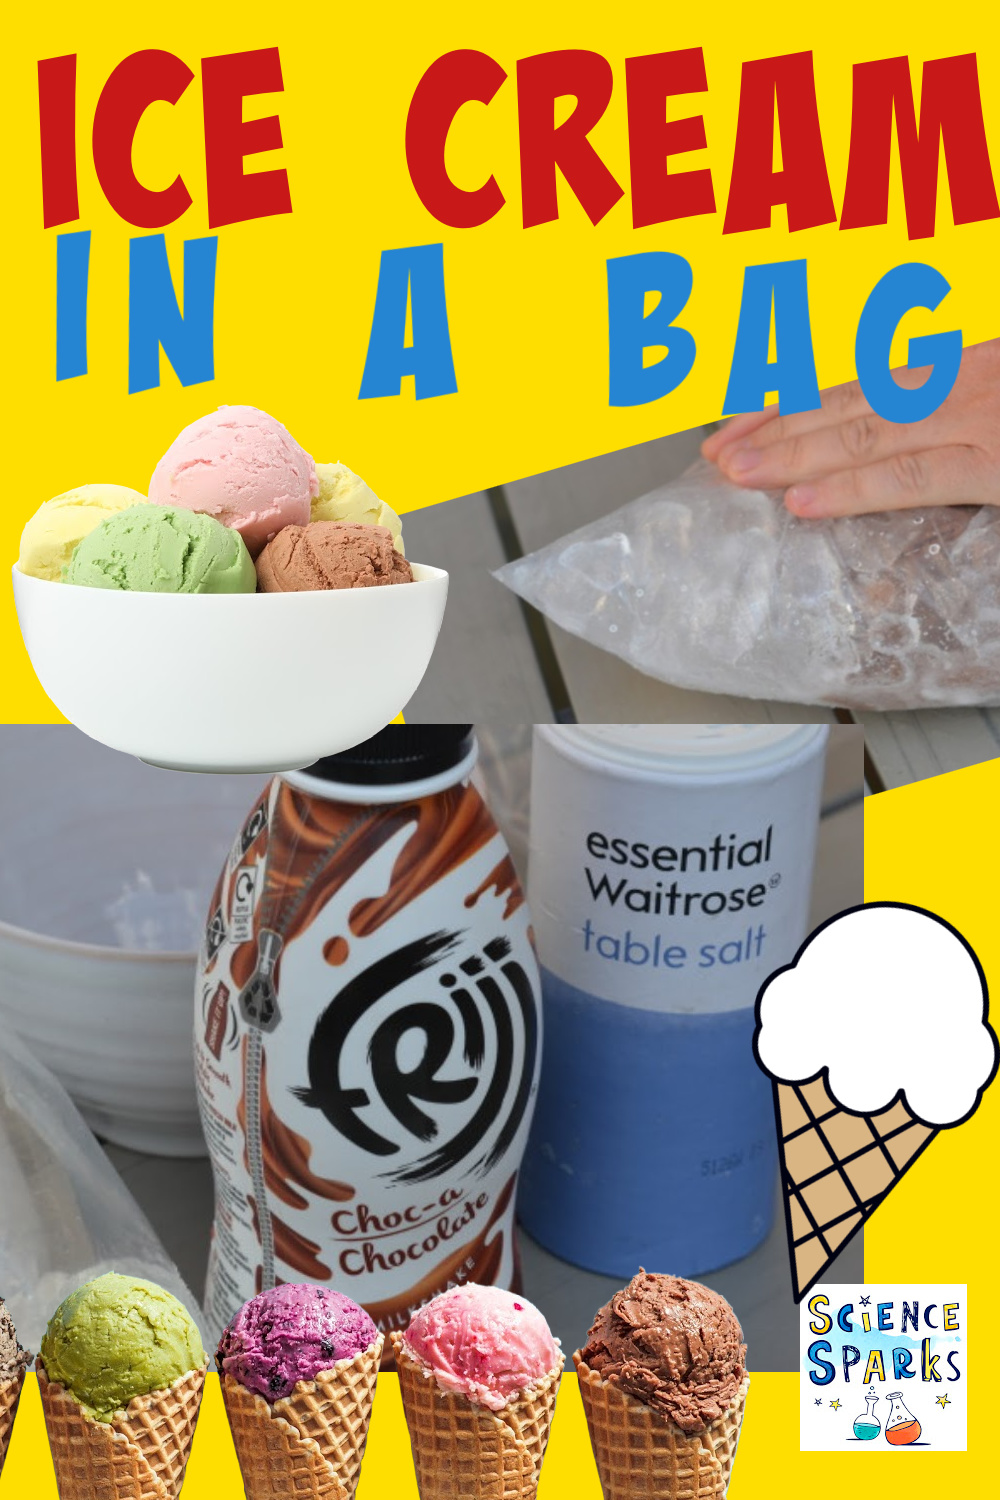 https://www.science-sparks.com/wp-content/uploads/2018/09/ICe-Cream-in-a-bag-2.jpg